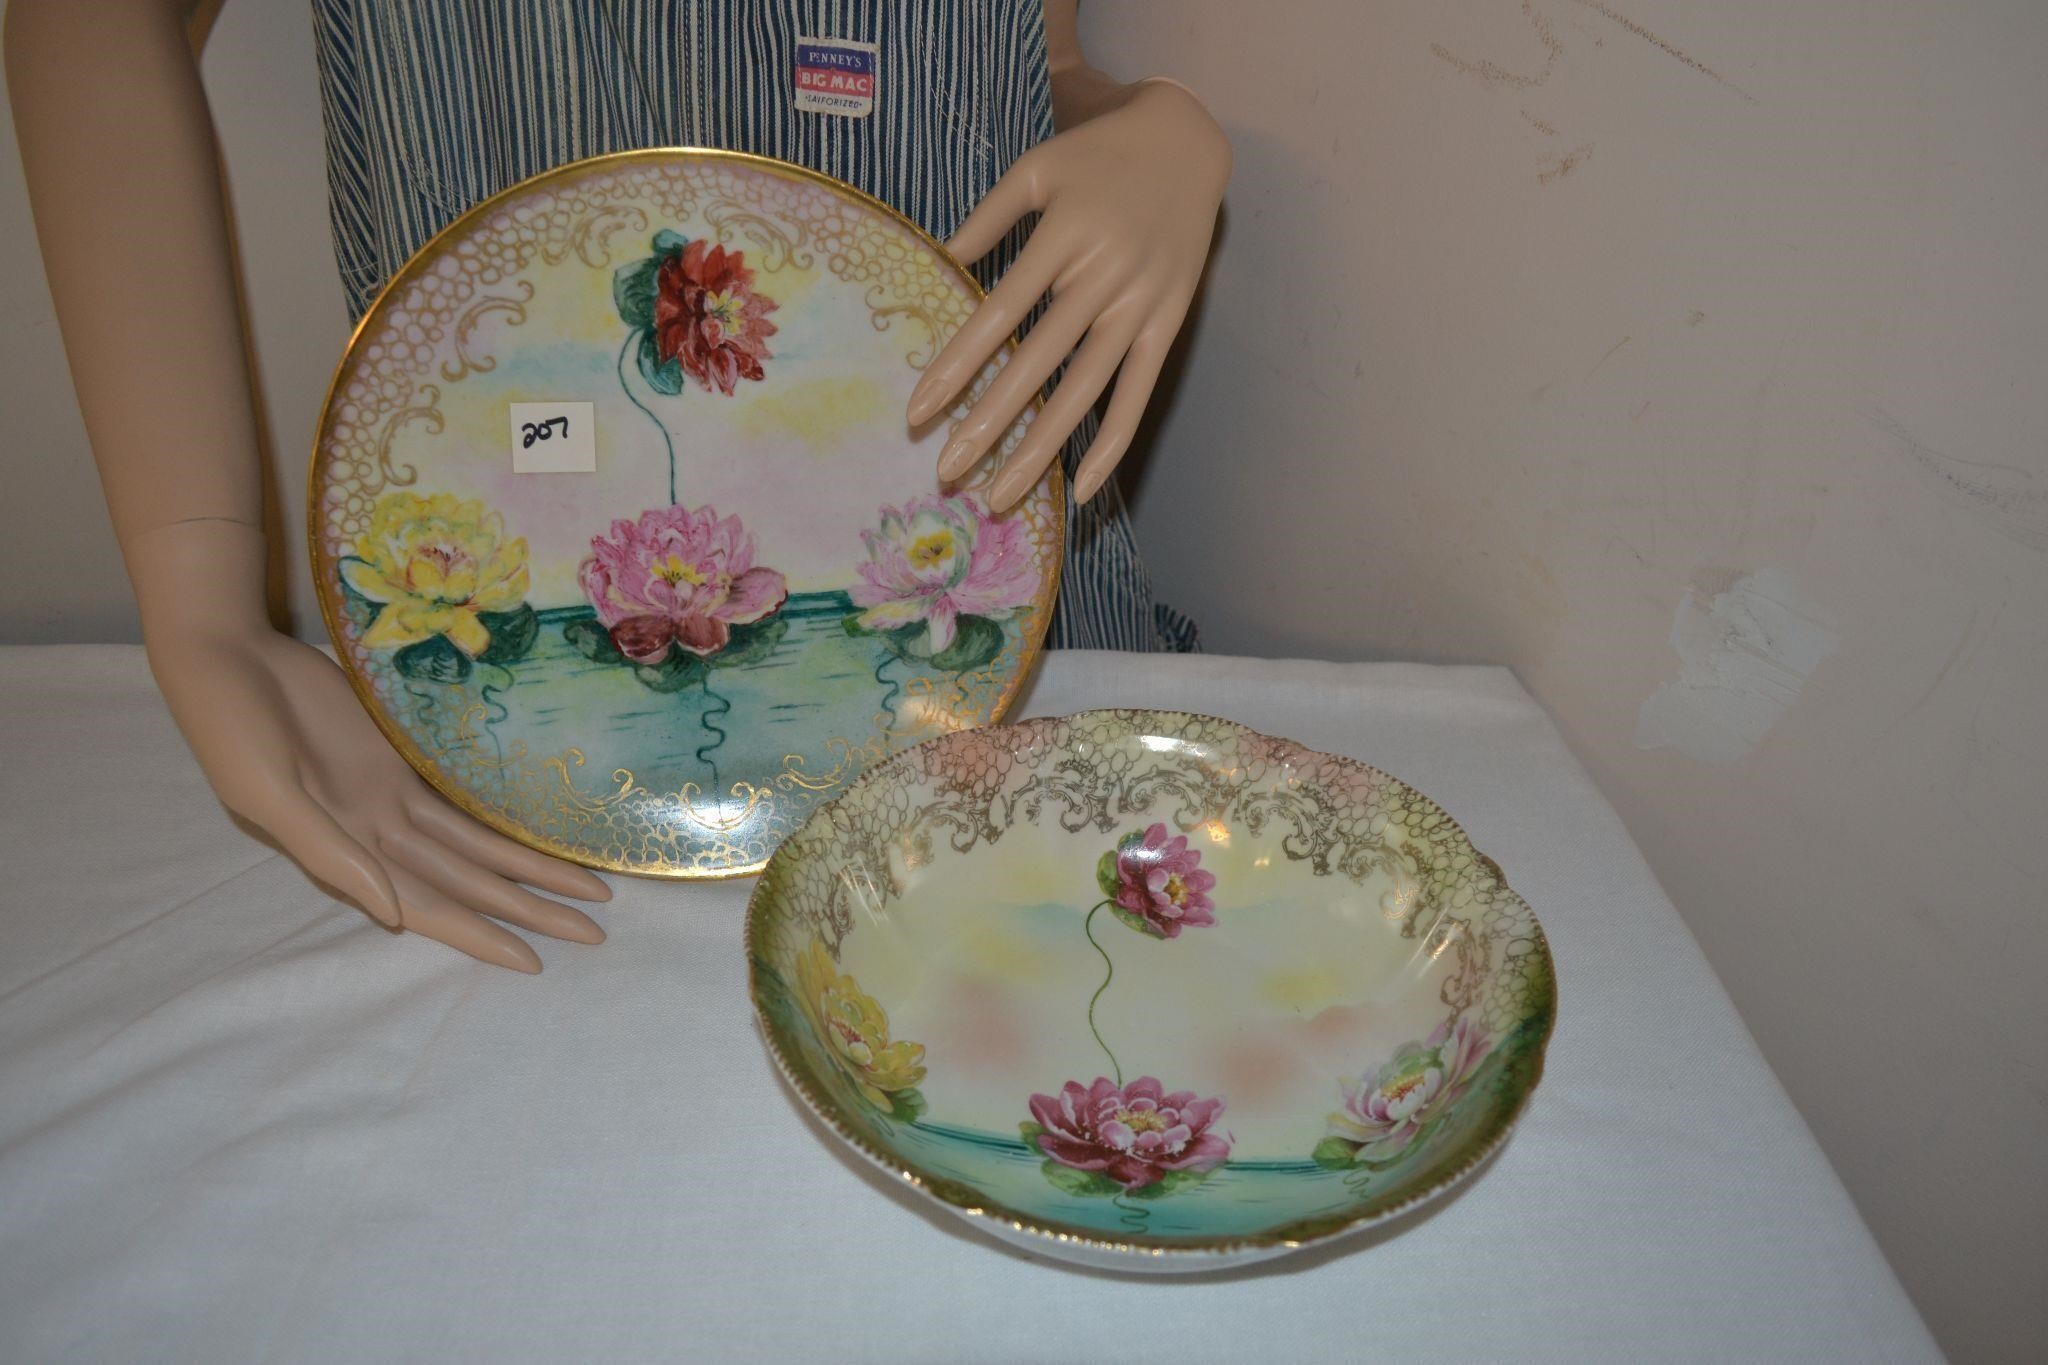 Decorative Hand Painted Plate and Bowl